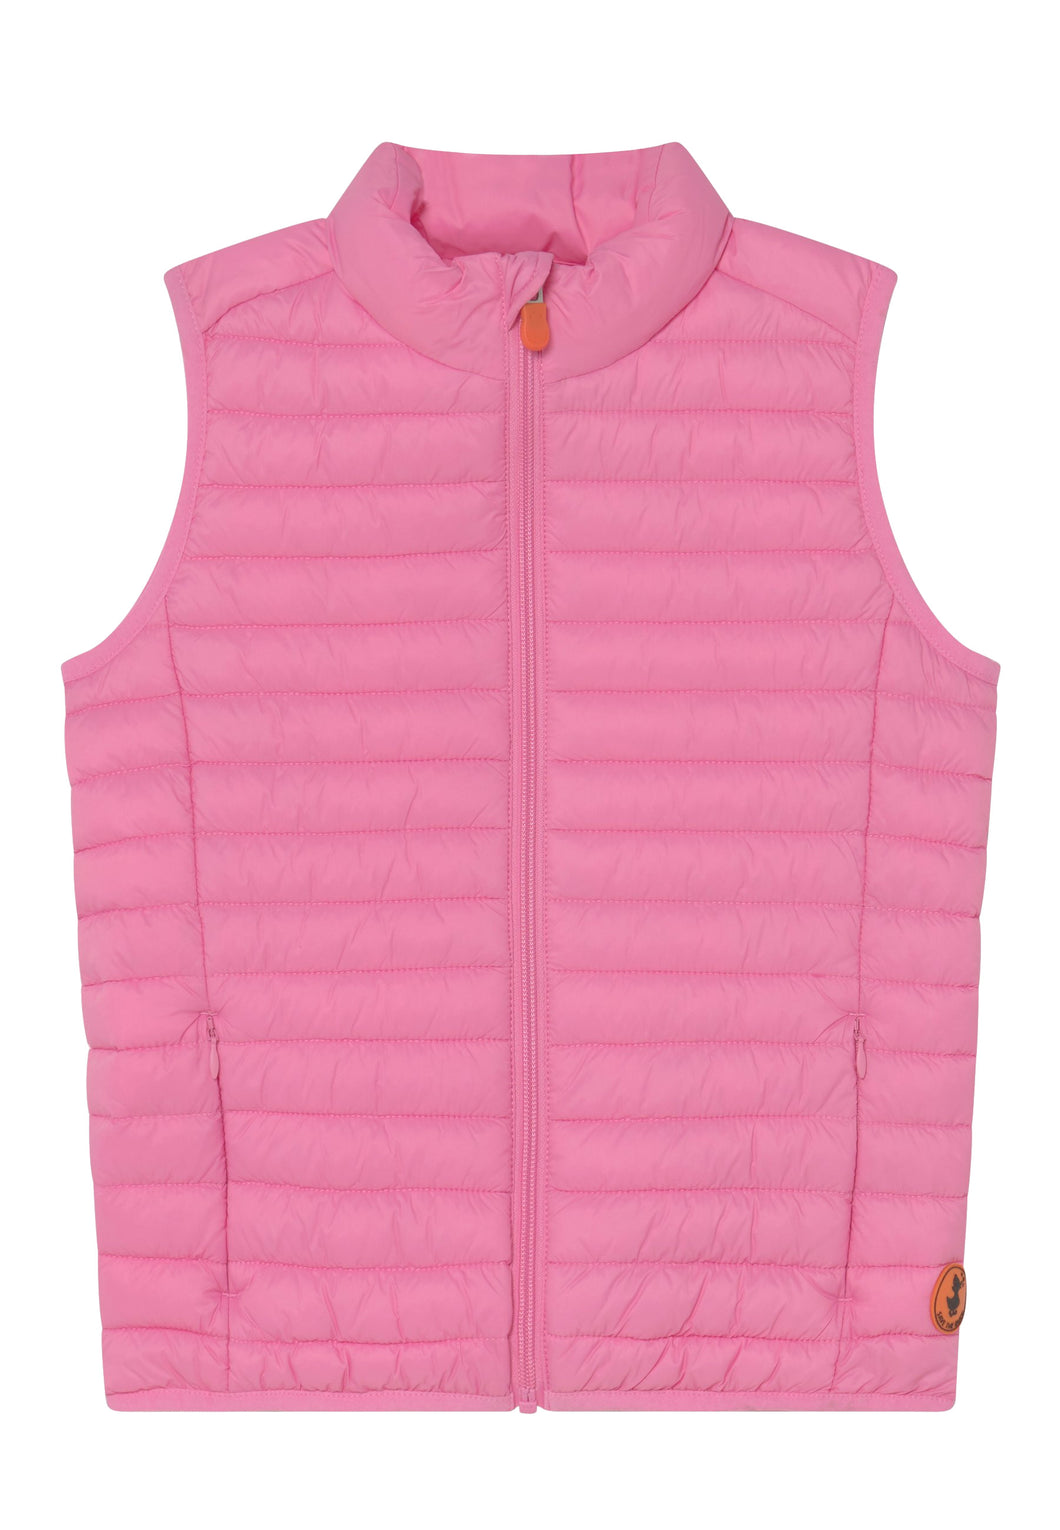 Gilet SAVE THE DUCK rosa